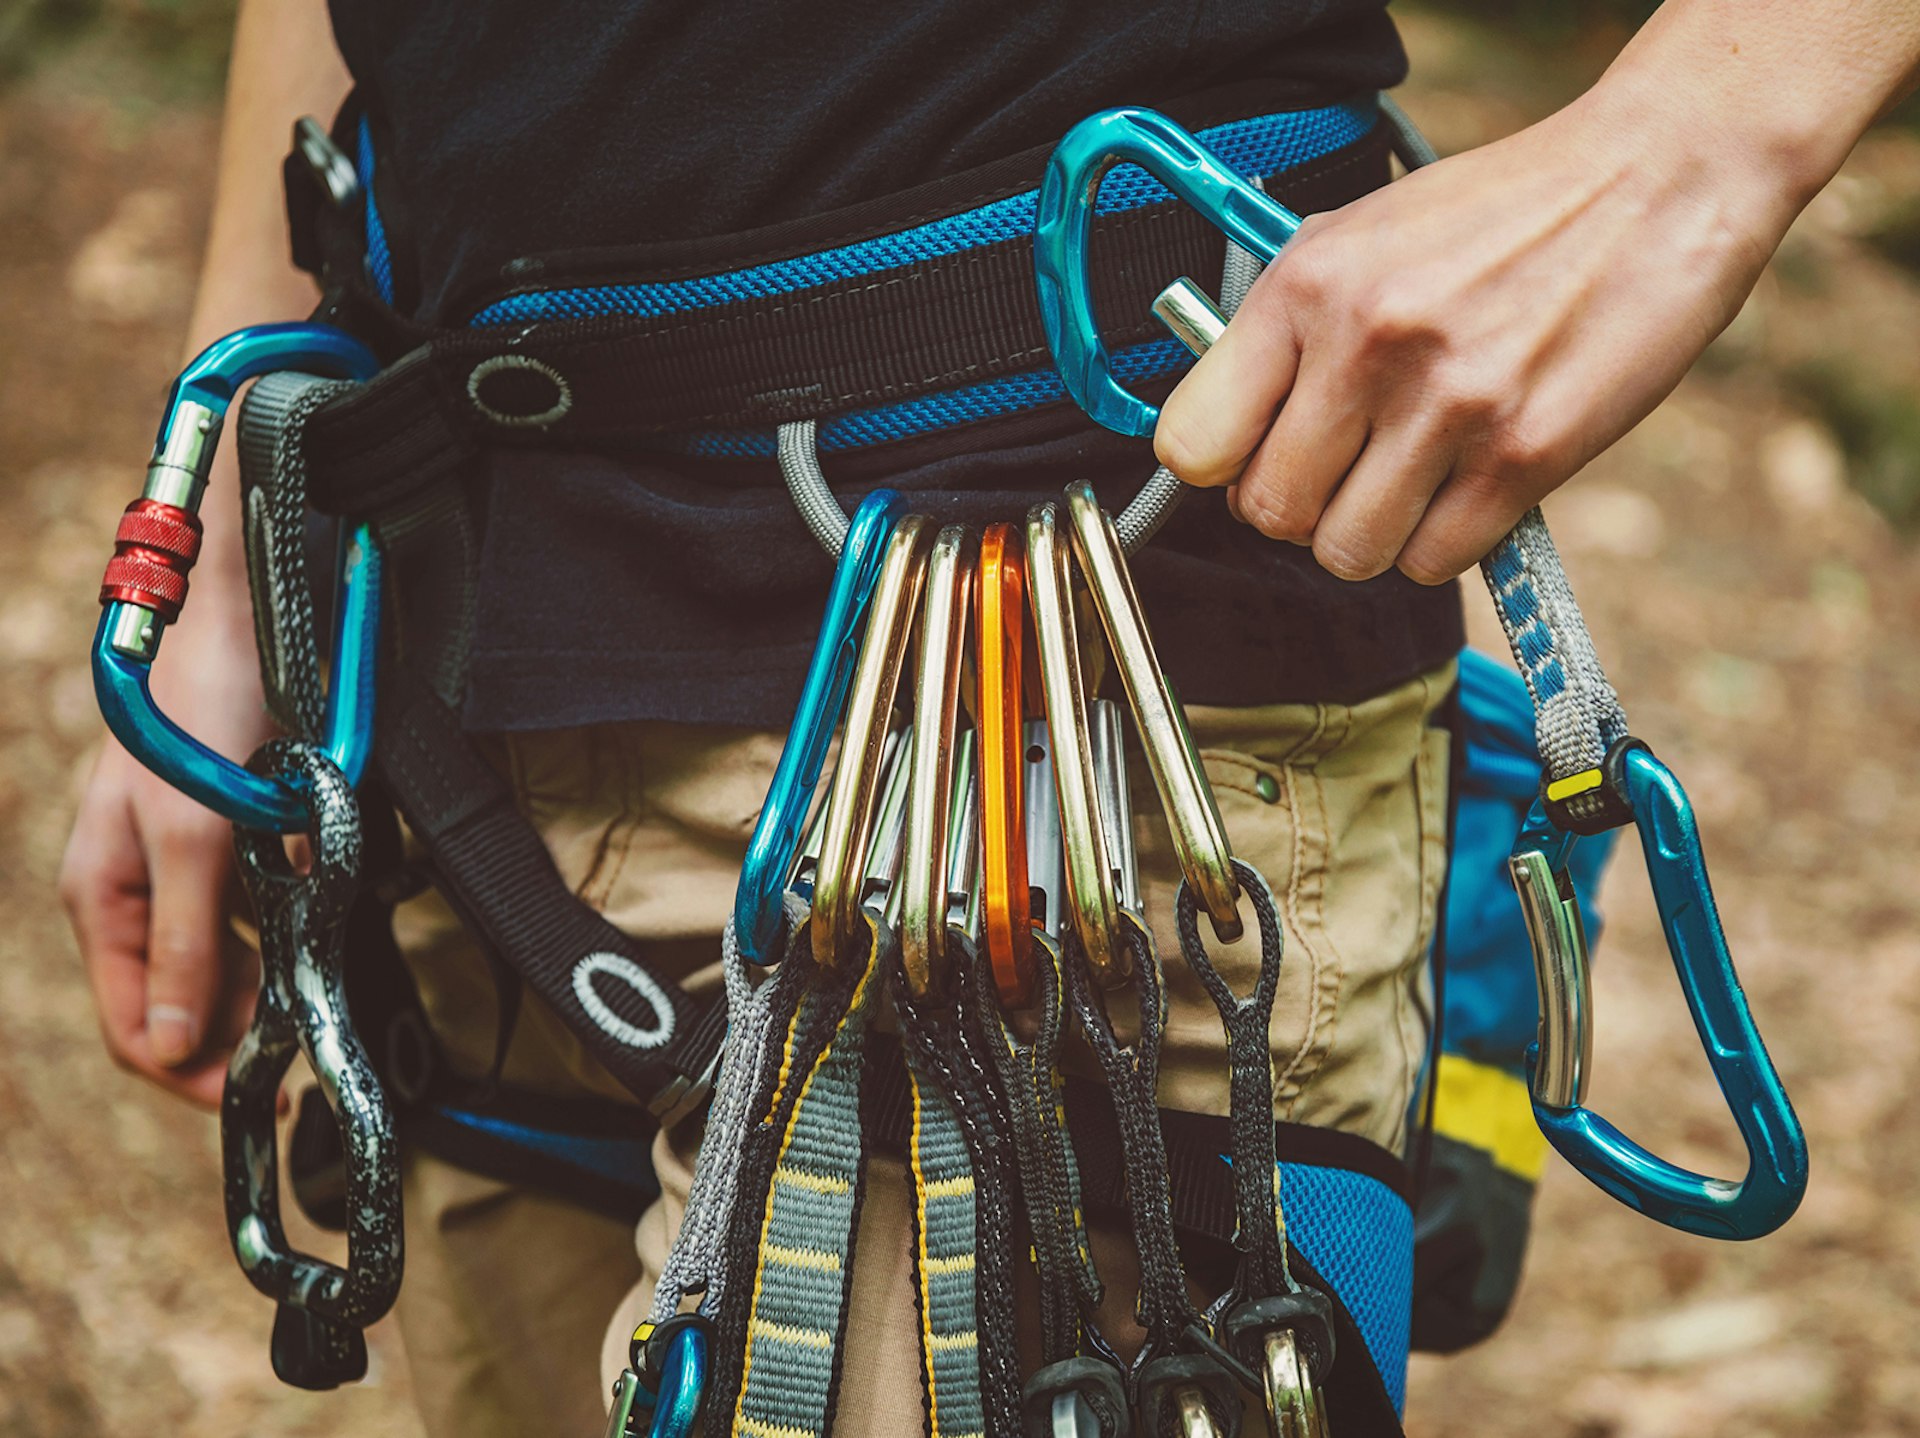 Features - Female rock climber wearing safety harness